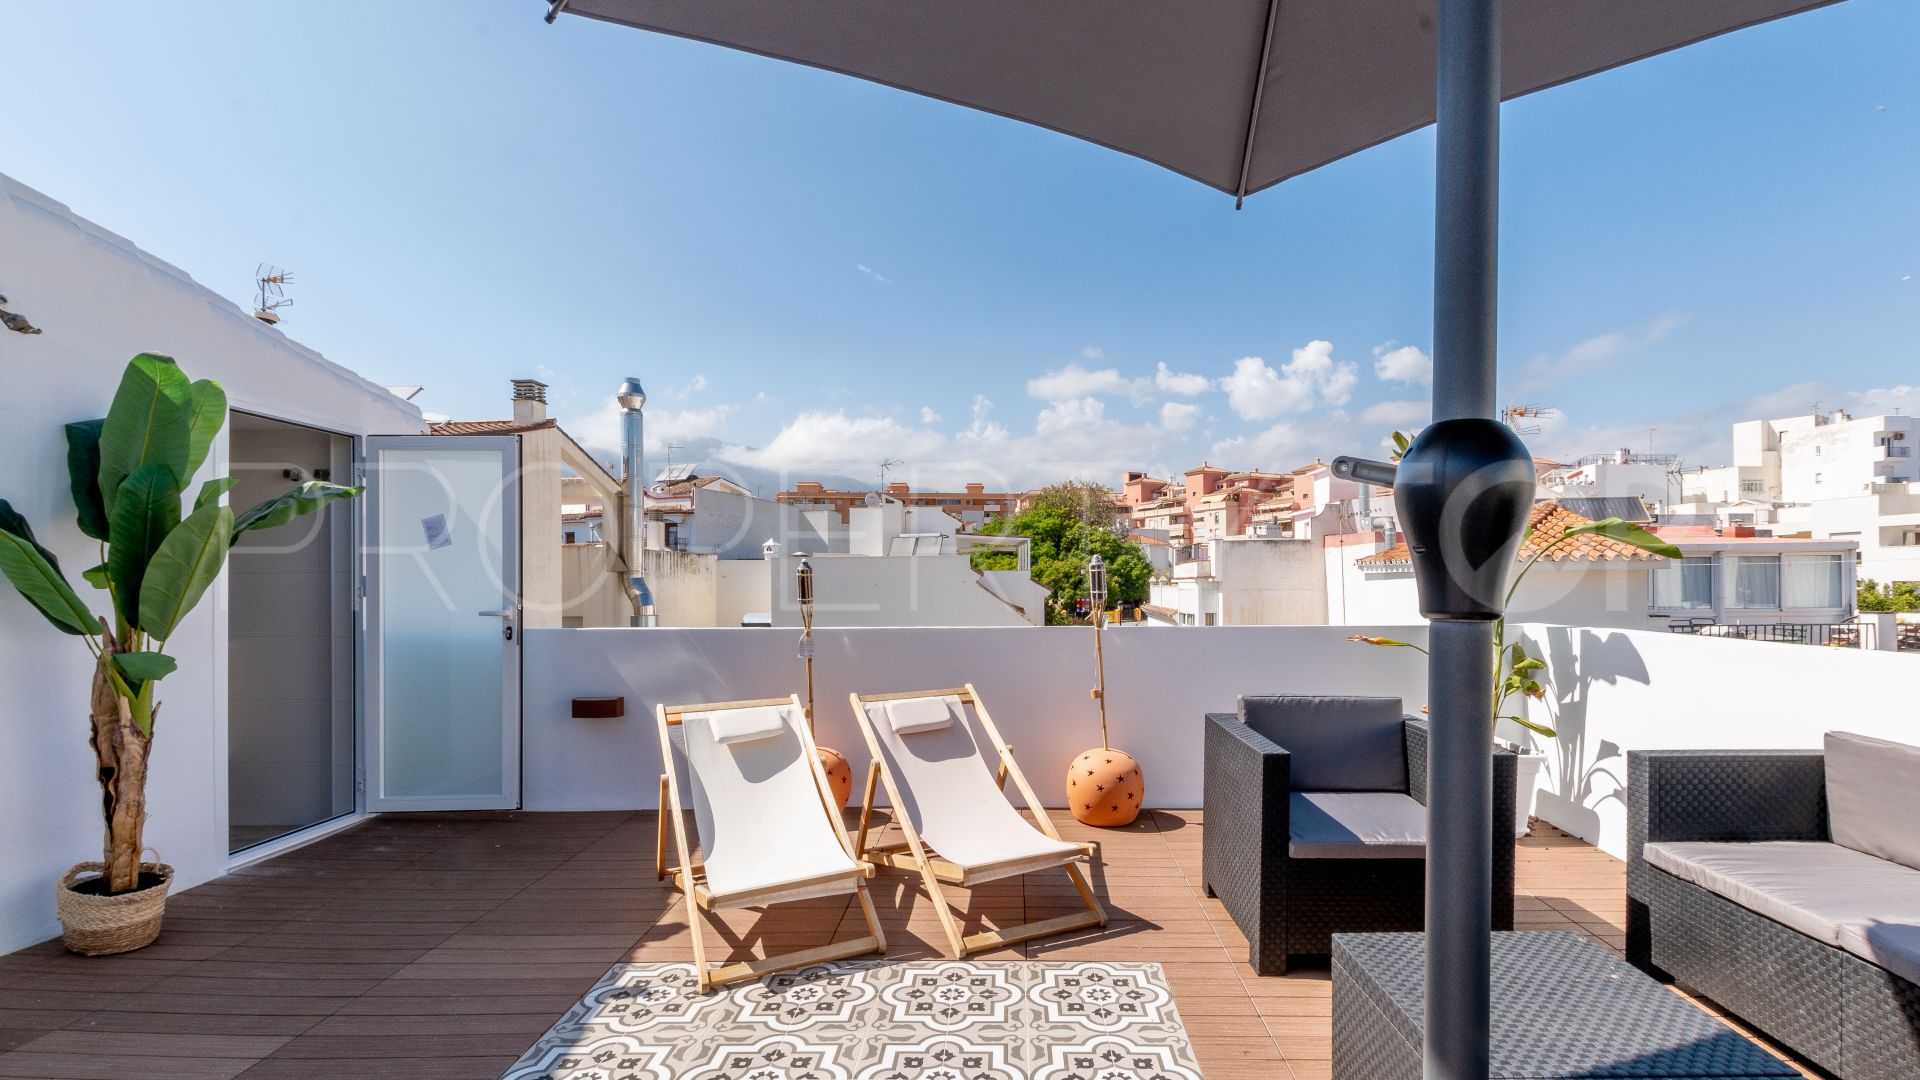 For sale 2 bedrooms duplex penthouse in Estepona Old Town